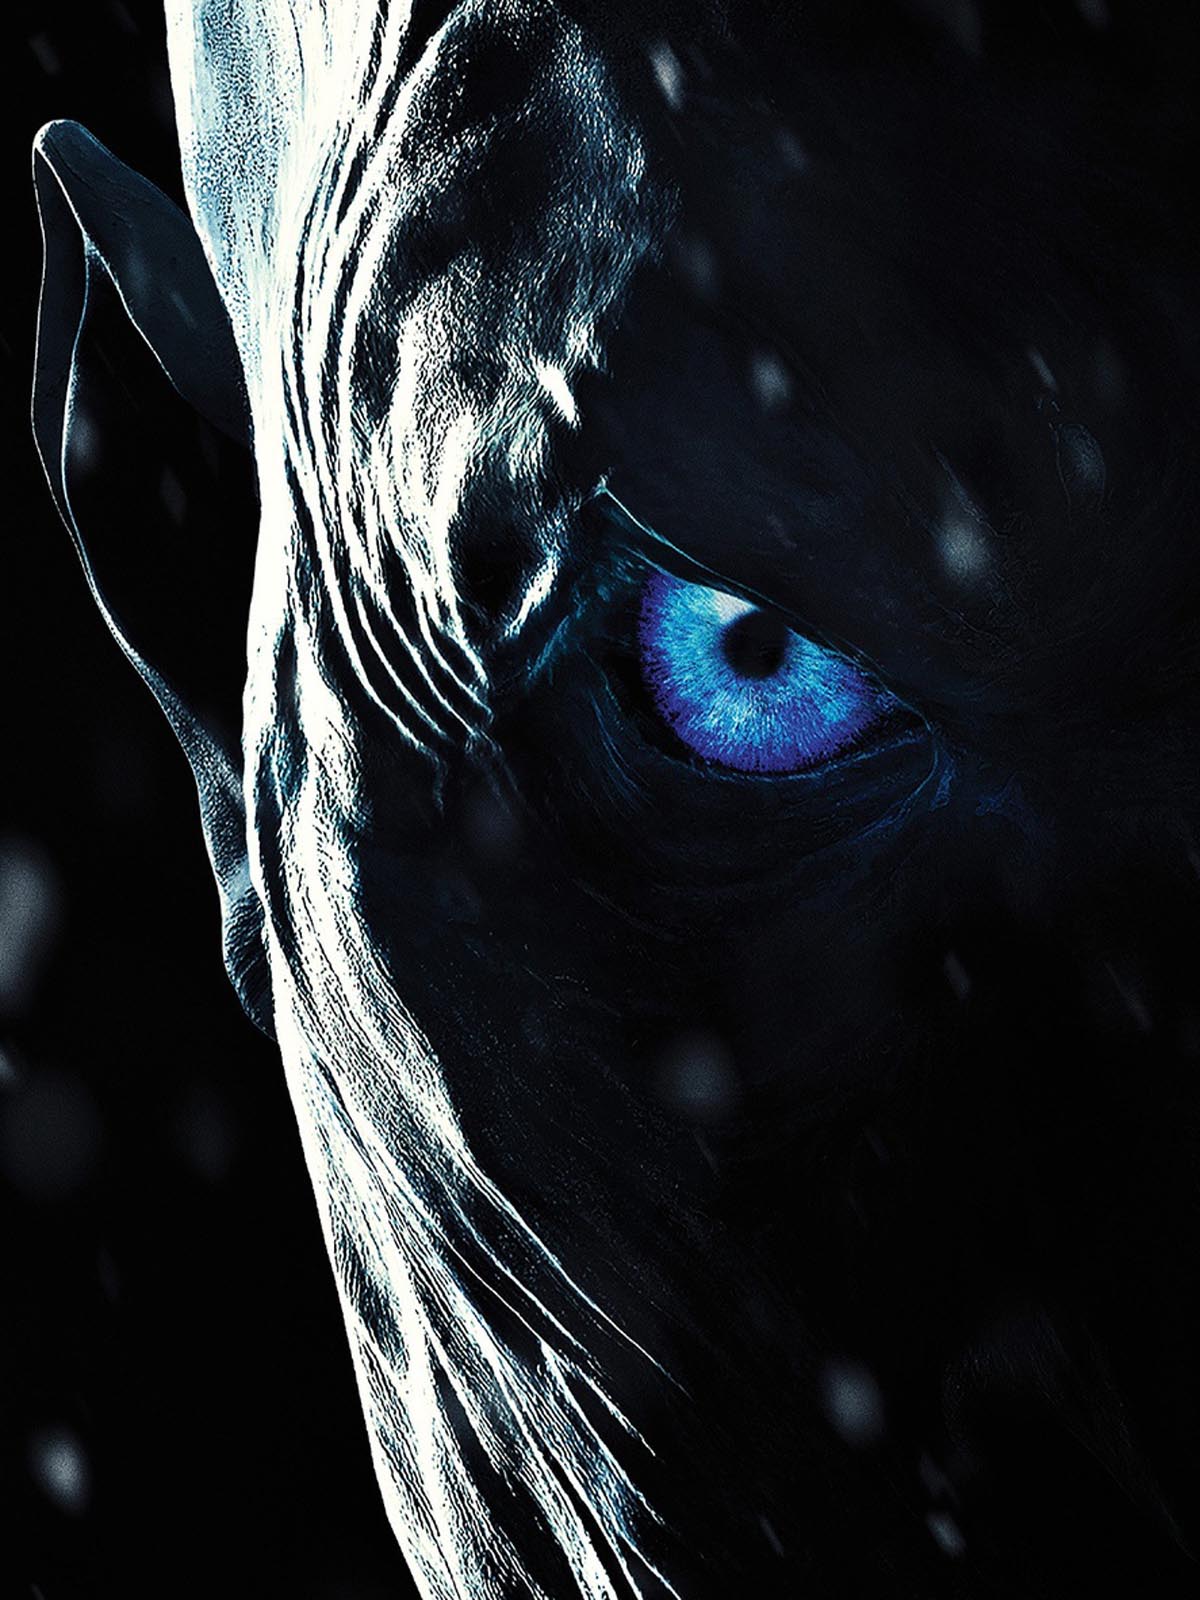 White Walkers In Game Of Thrones 7 4K Ultra HD Mobile Wallpaper